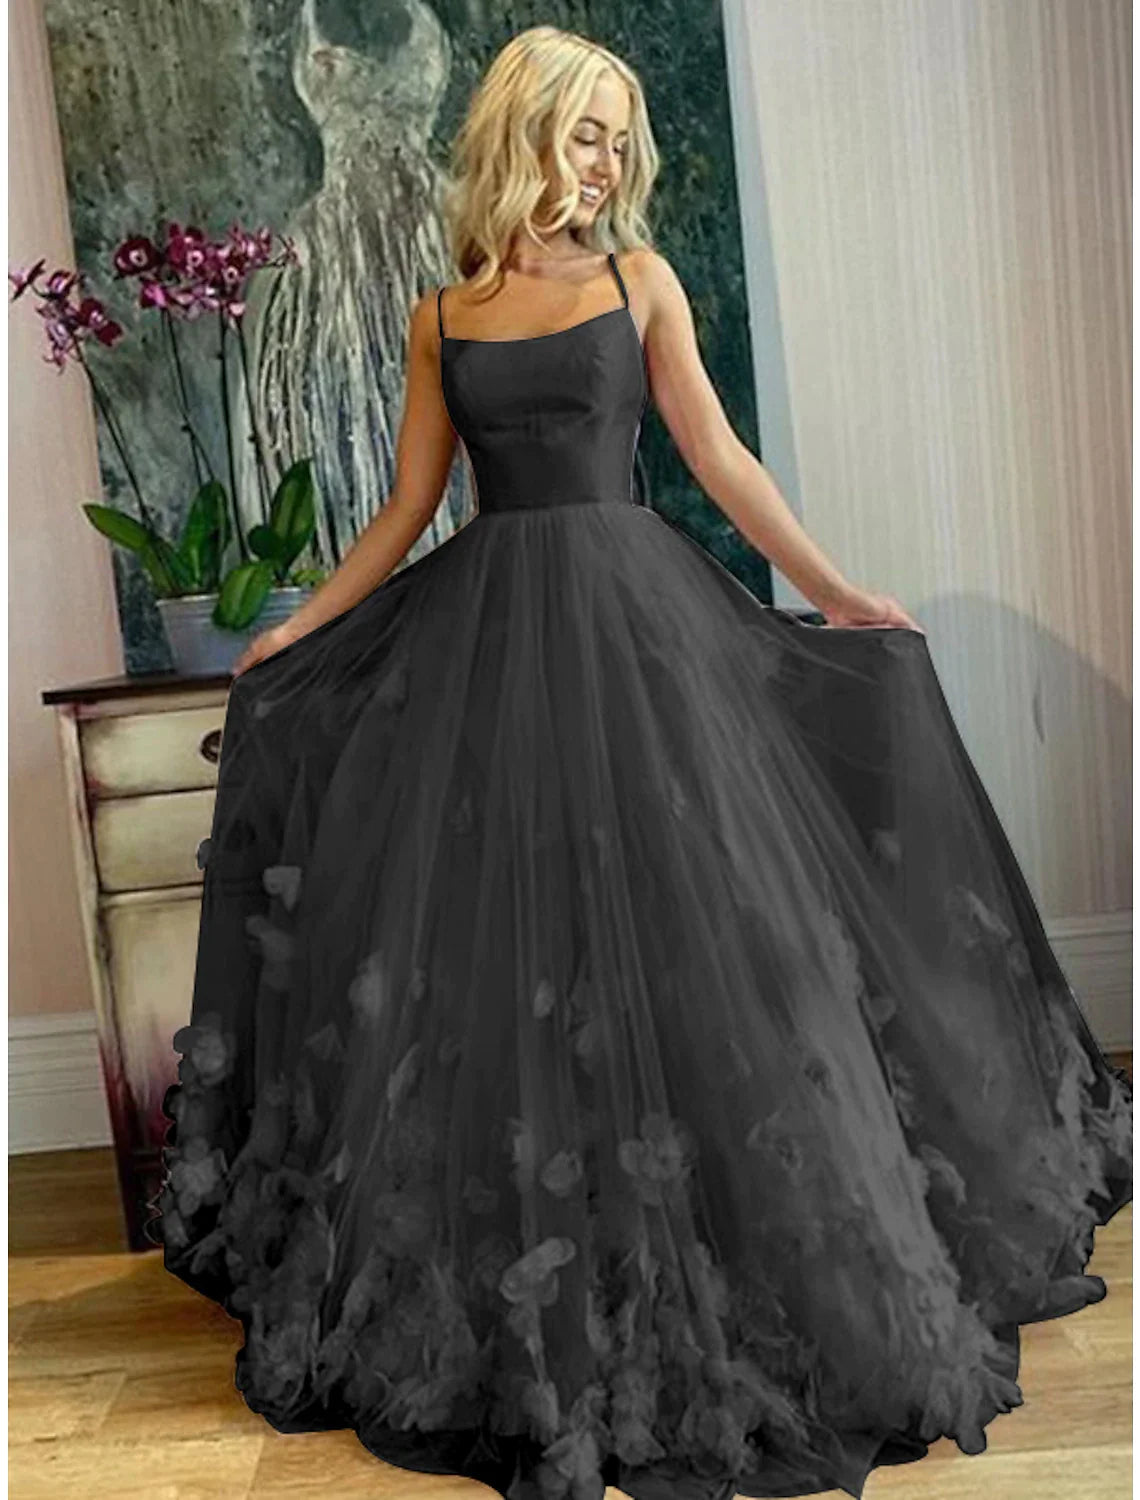 A-Line Prom Dresses Floral Dress Performance Floor Length Sleeveless Spaghetti Strap Tulle with Pleats Appliques